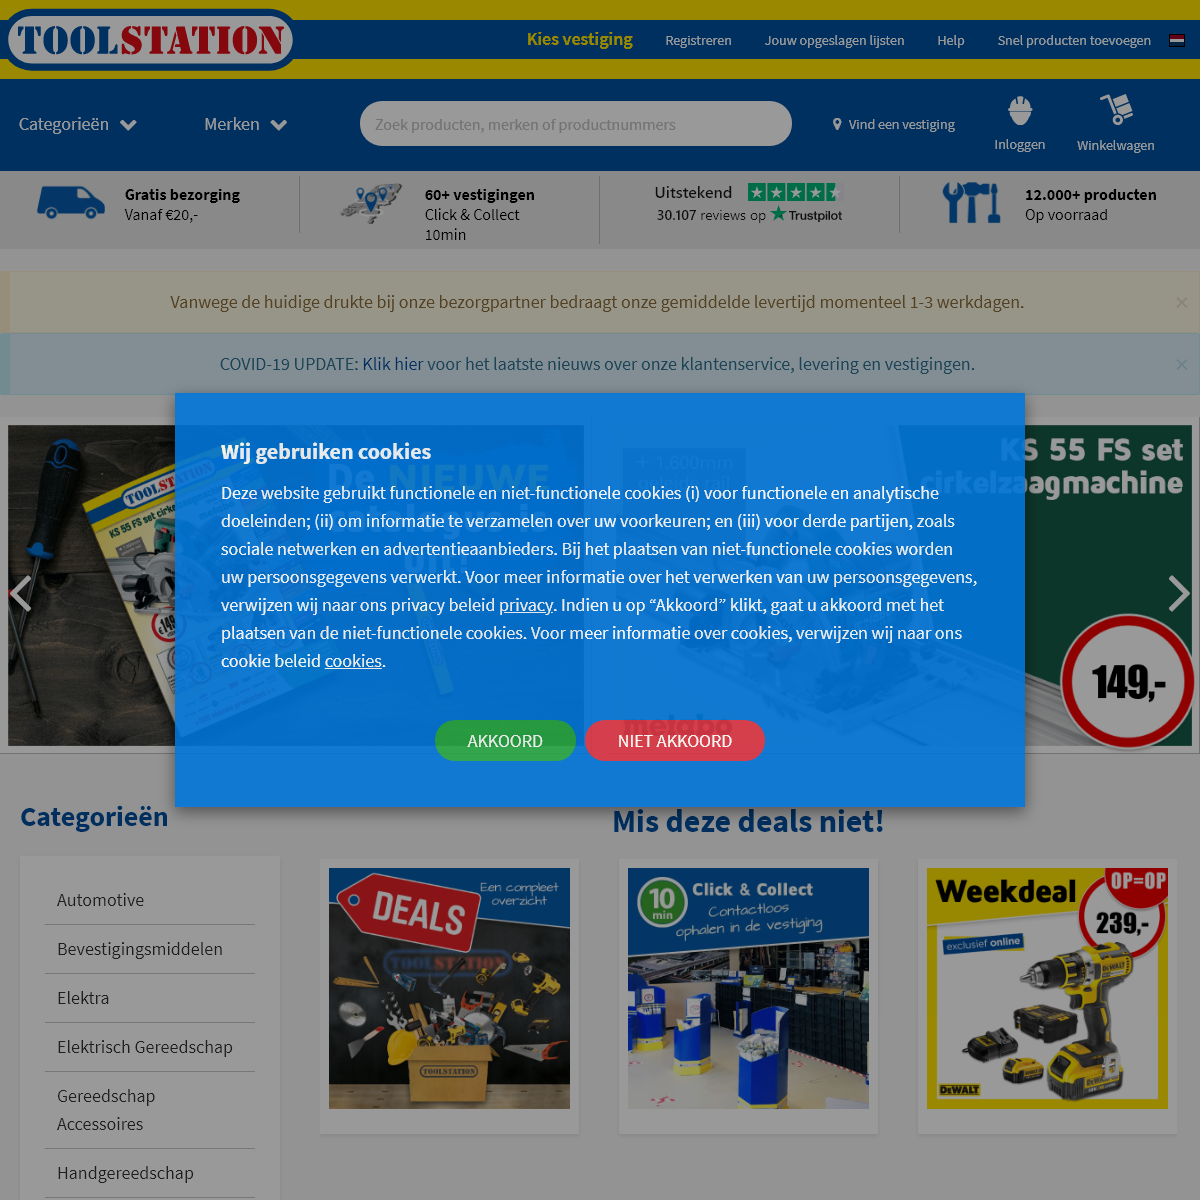 A complete backup of toolstation.nl